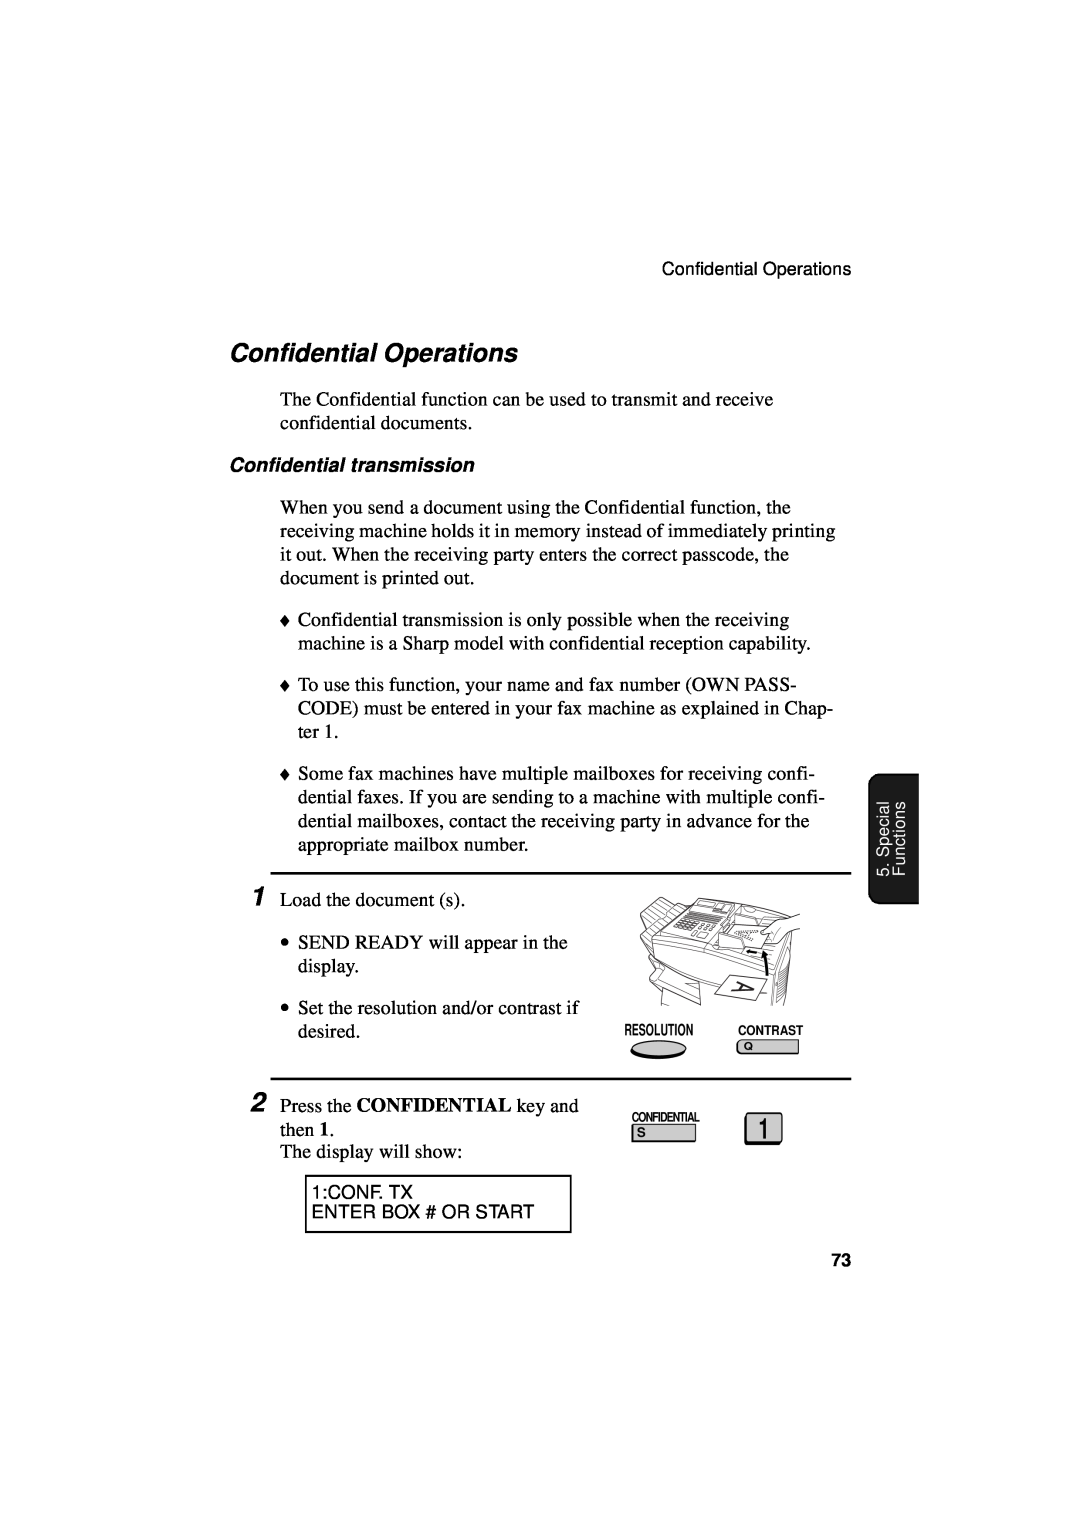 Sharp FO-5700, FO-4700, FO-5550 operation manual Confidential Operations, Confidential transmission, desired 